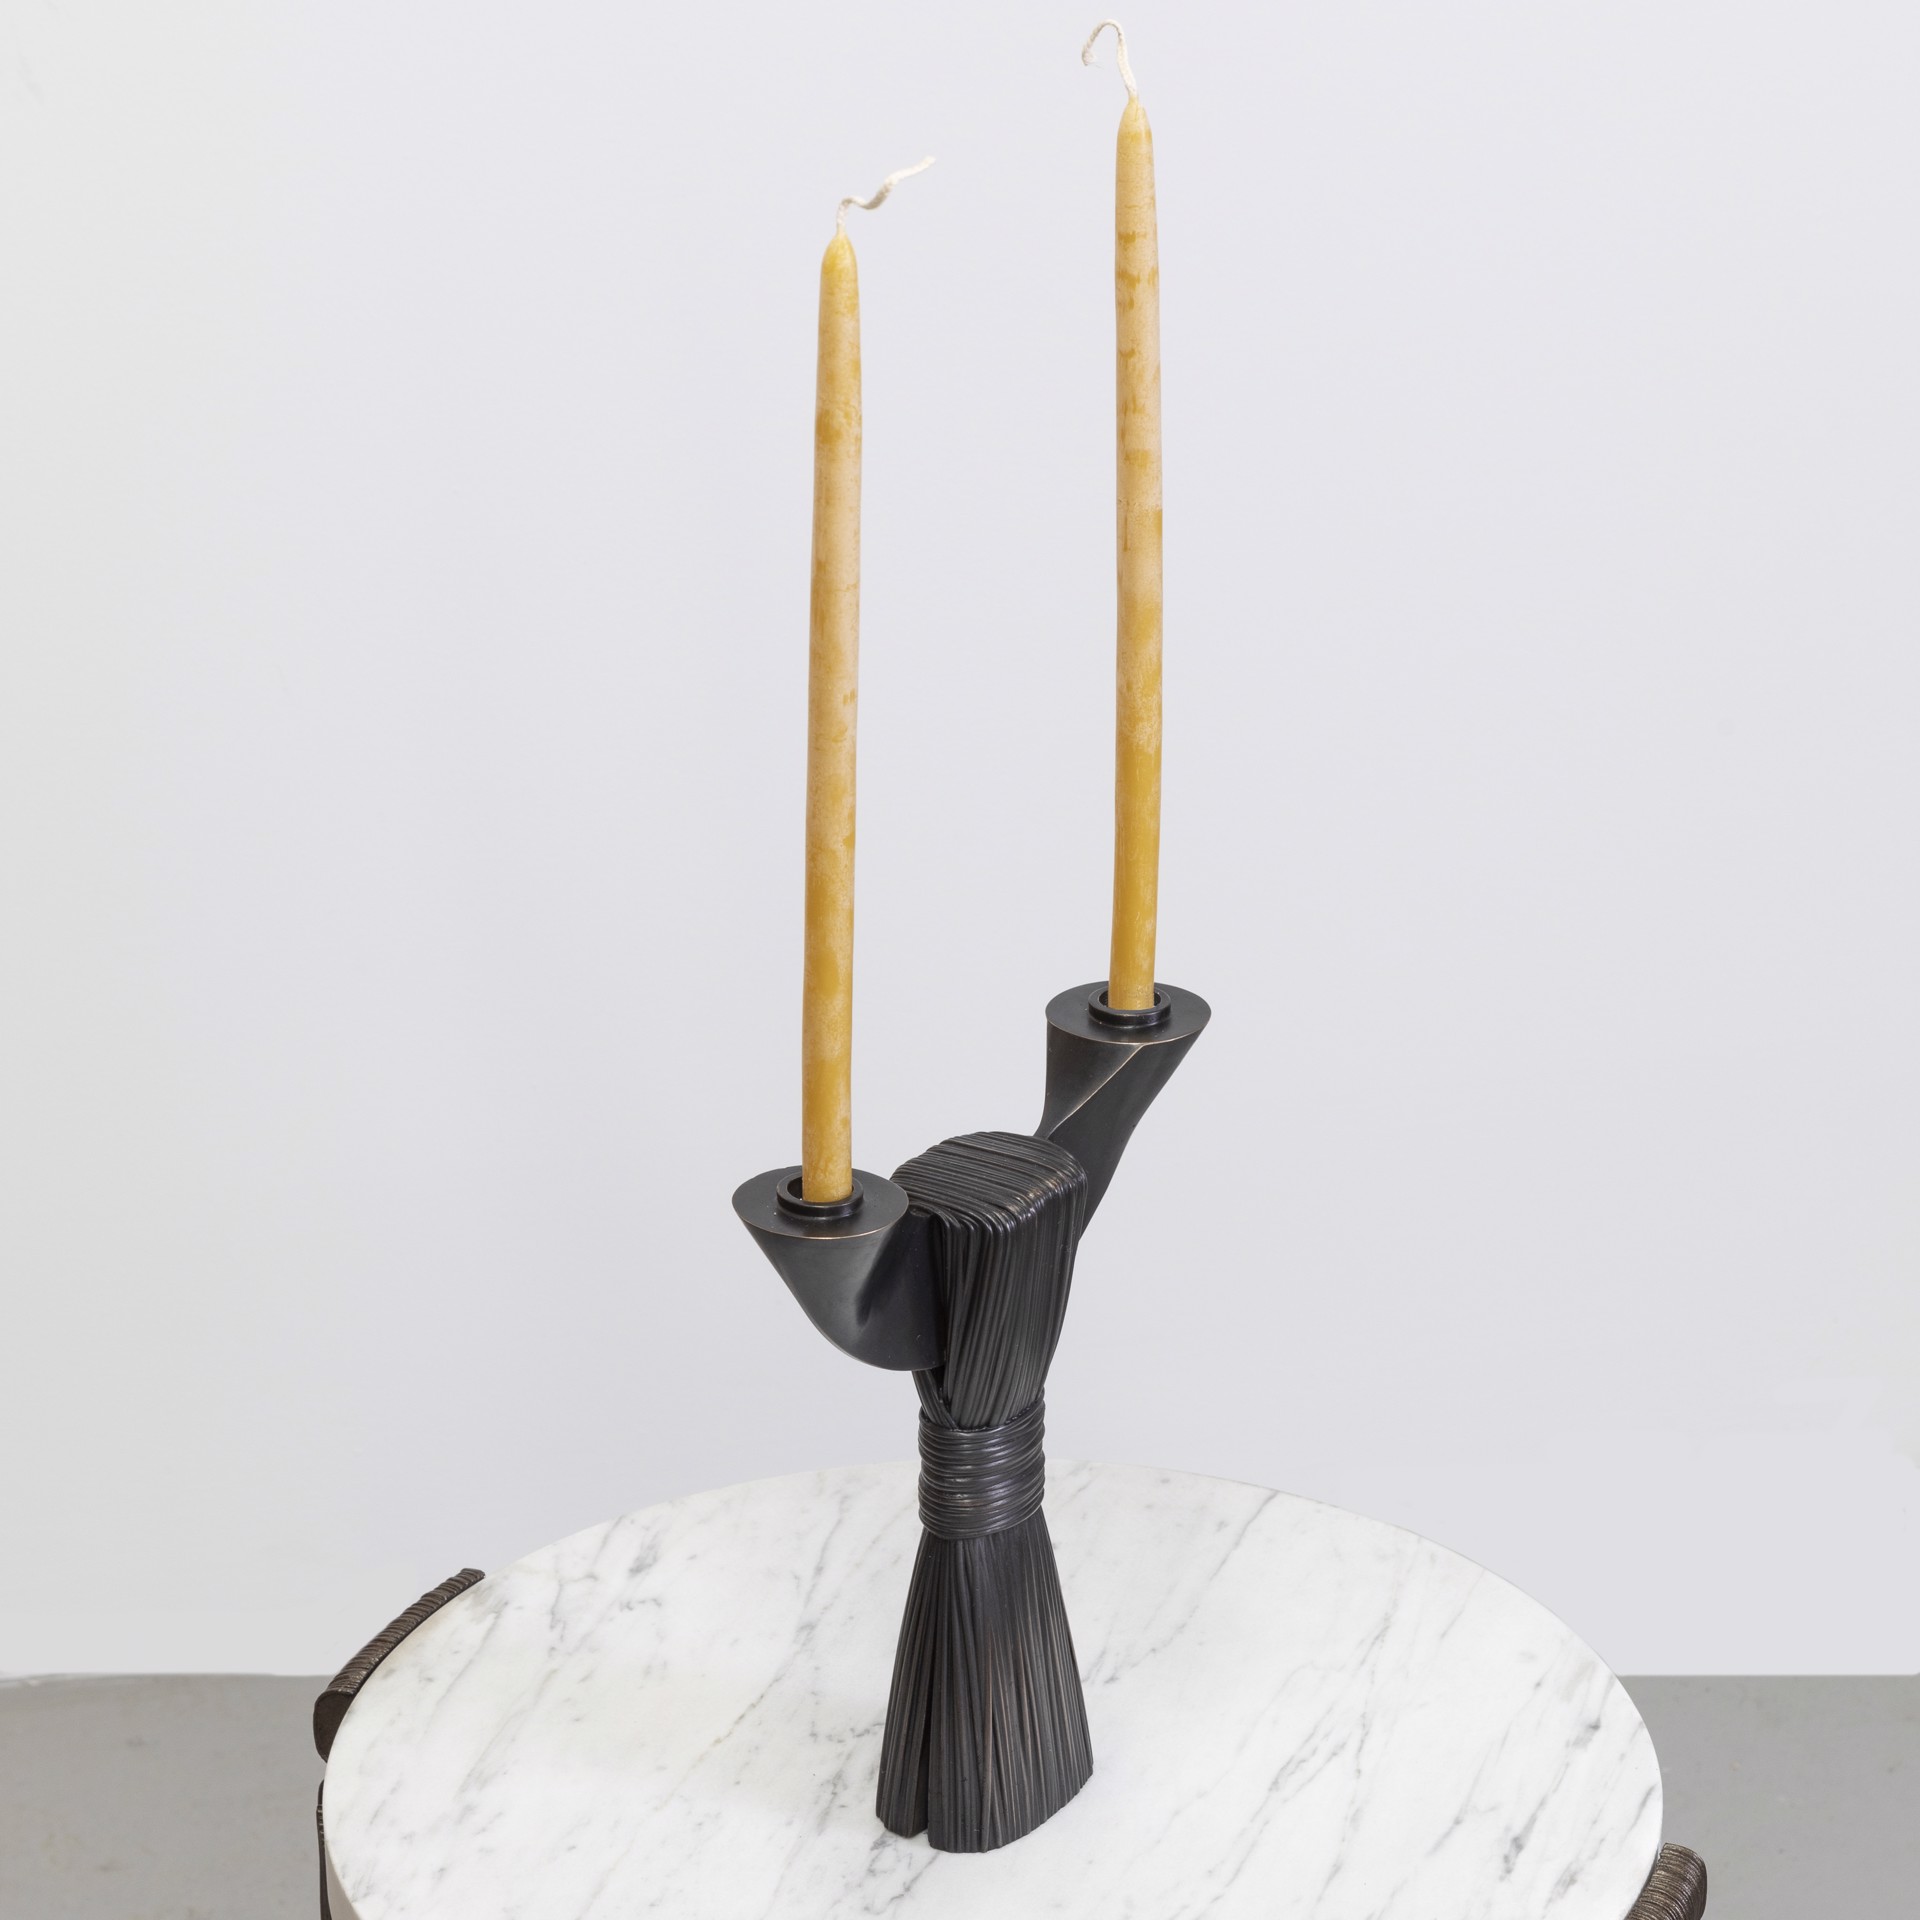 Candelabra in bronze by Anasthasia Millot